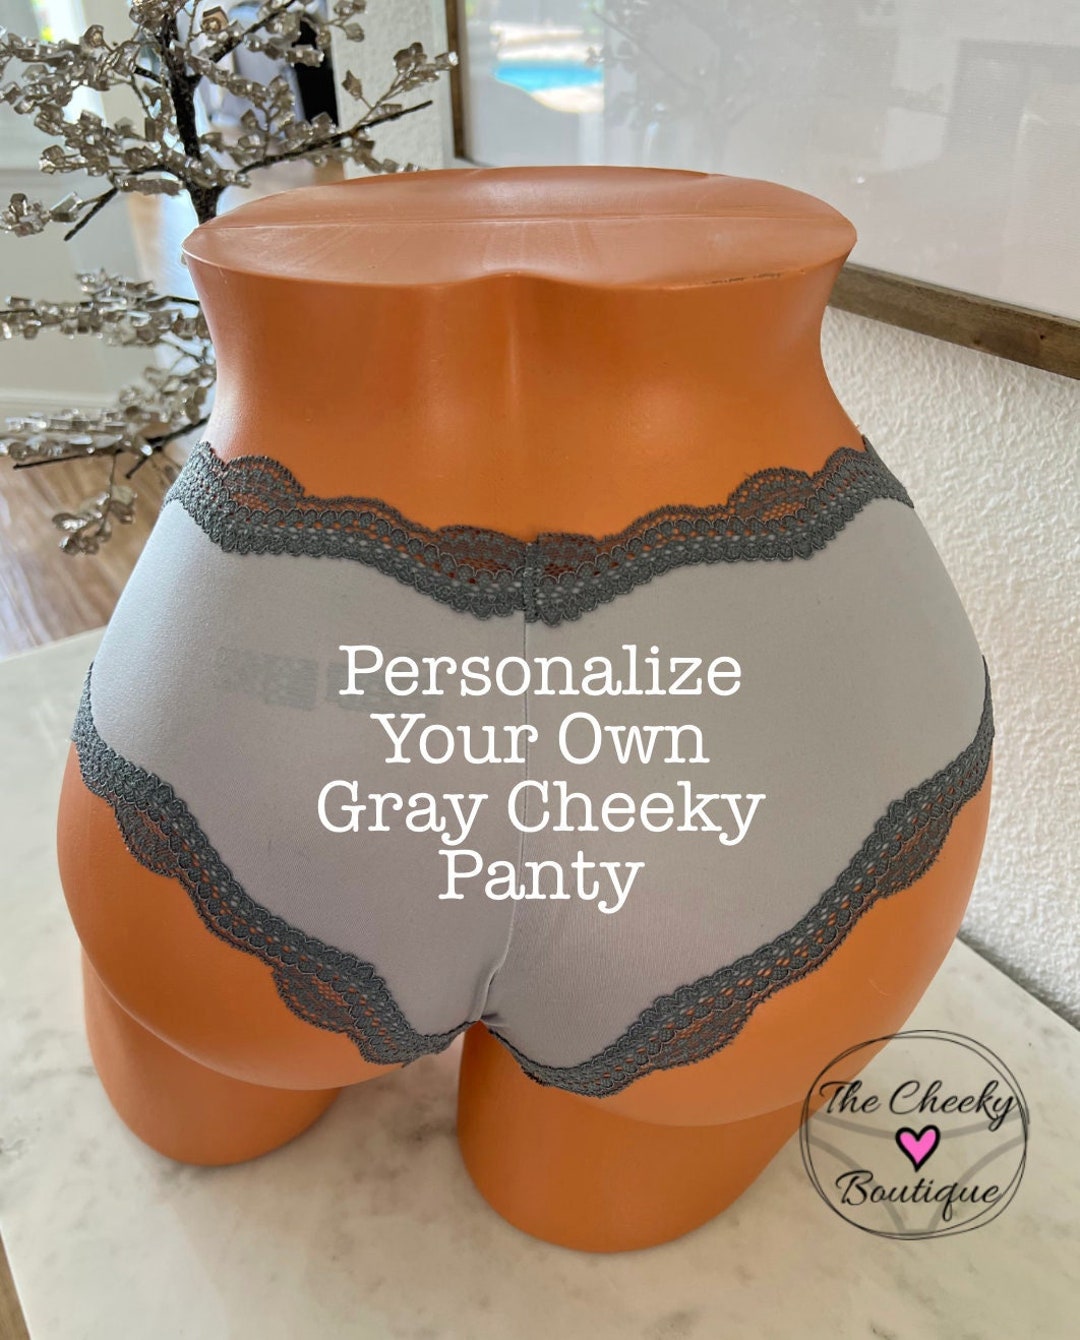 Personalize a Gray Cheeky Panty With Your Own Words FAST SHIPPING